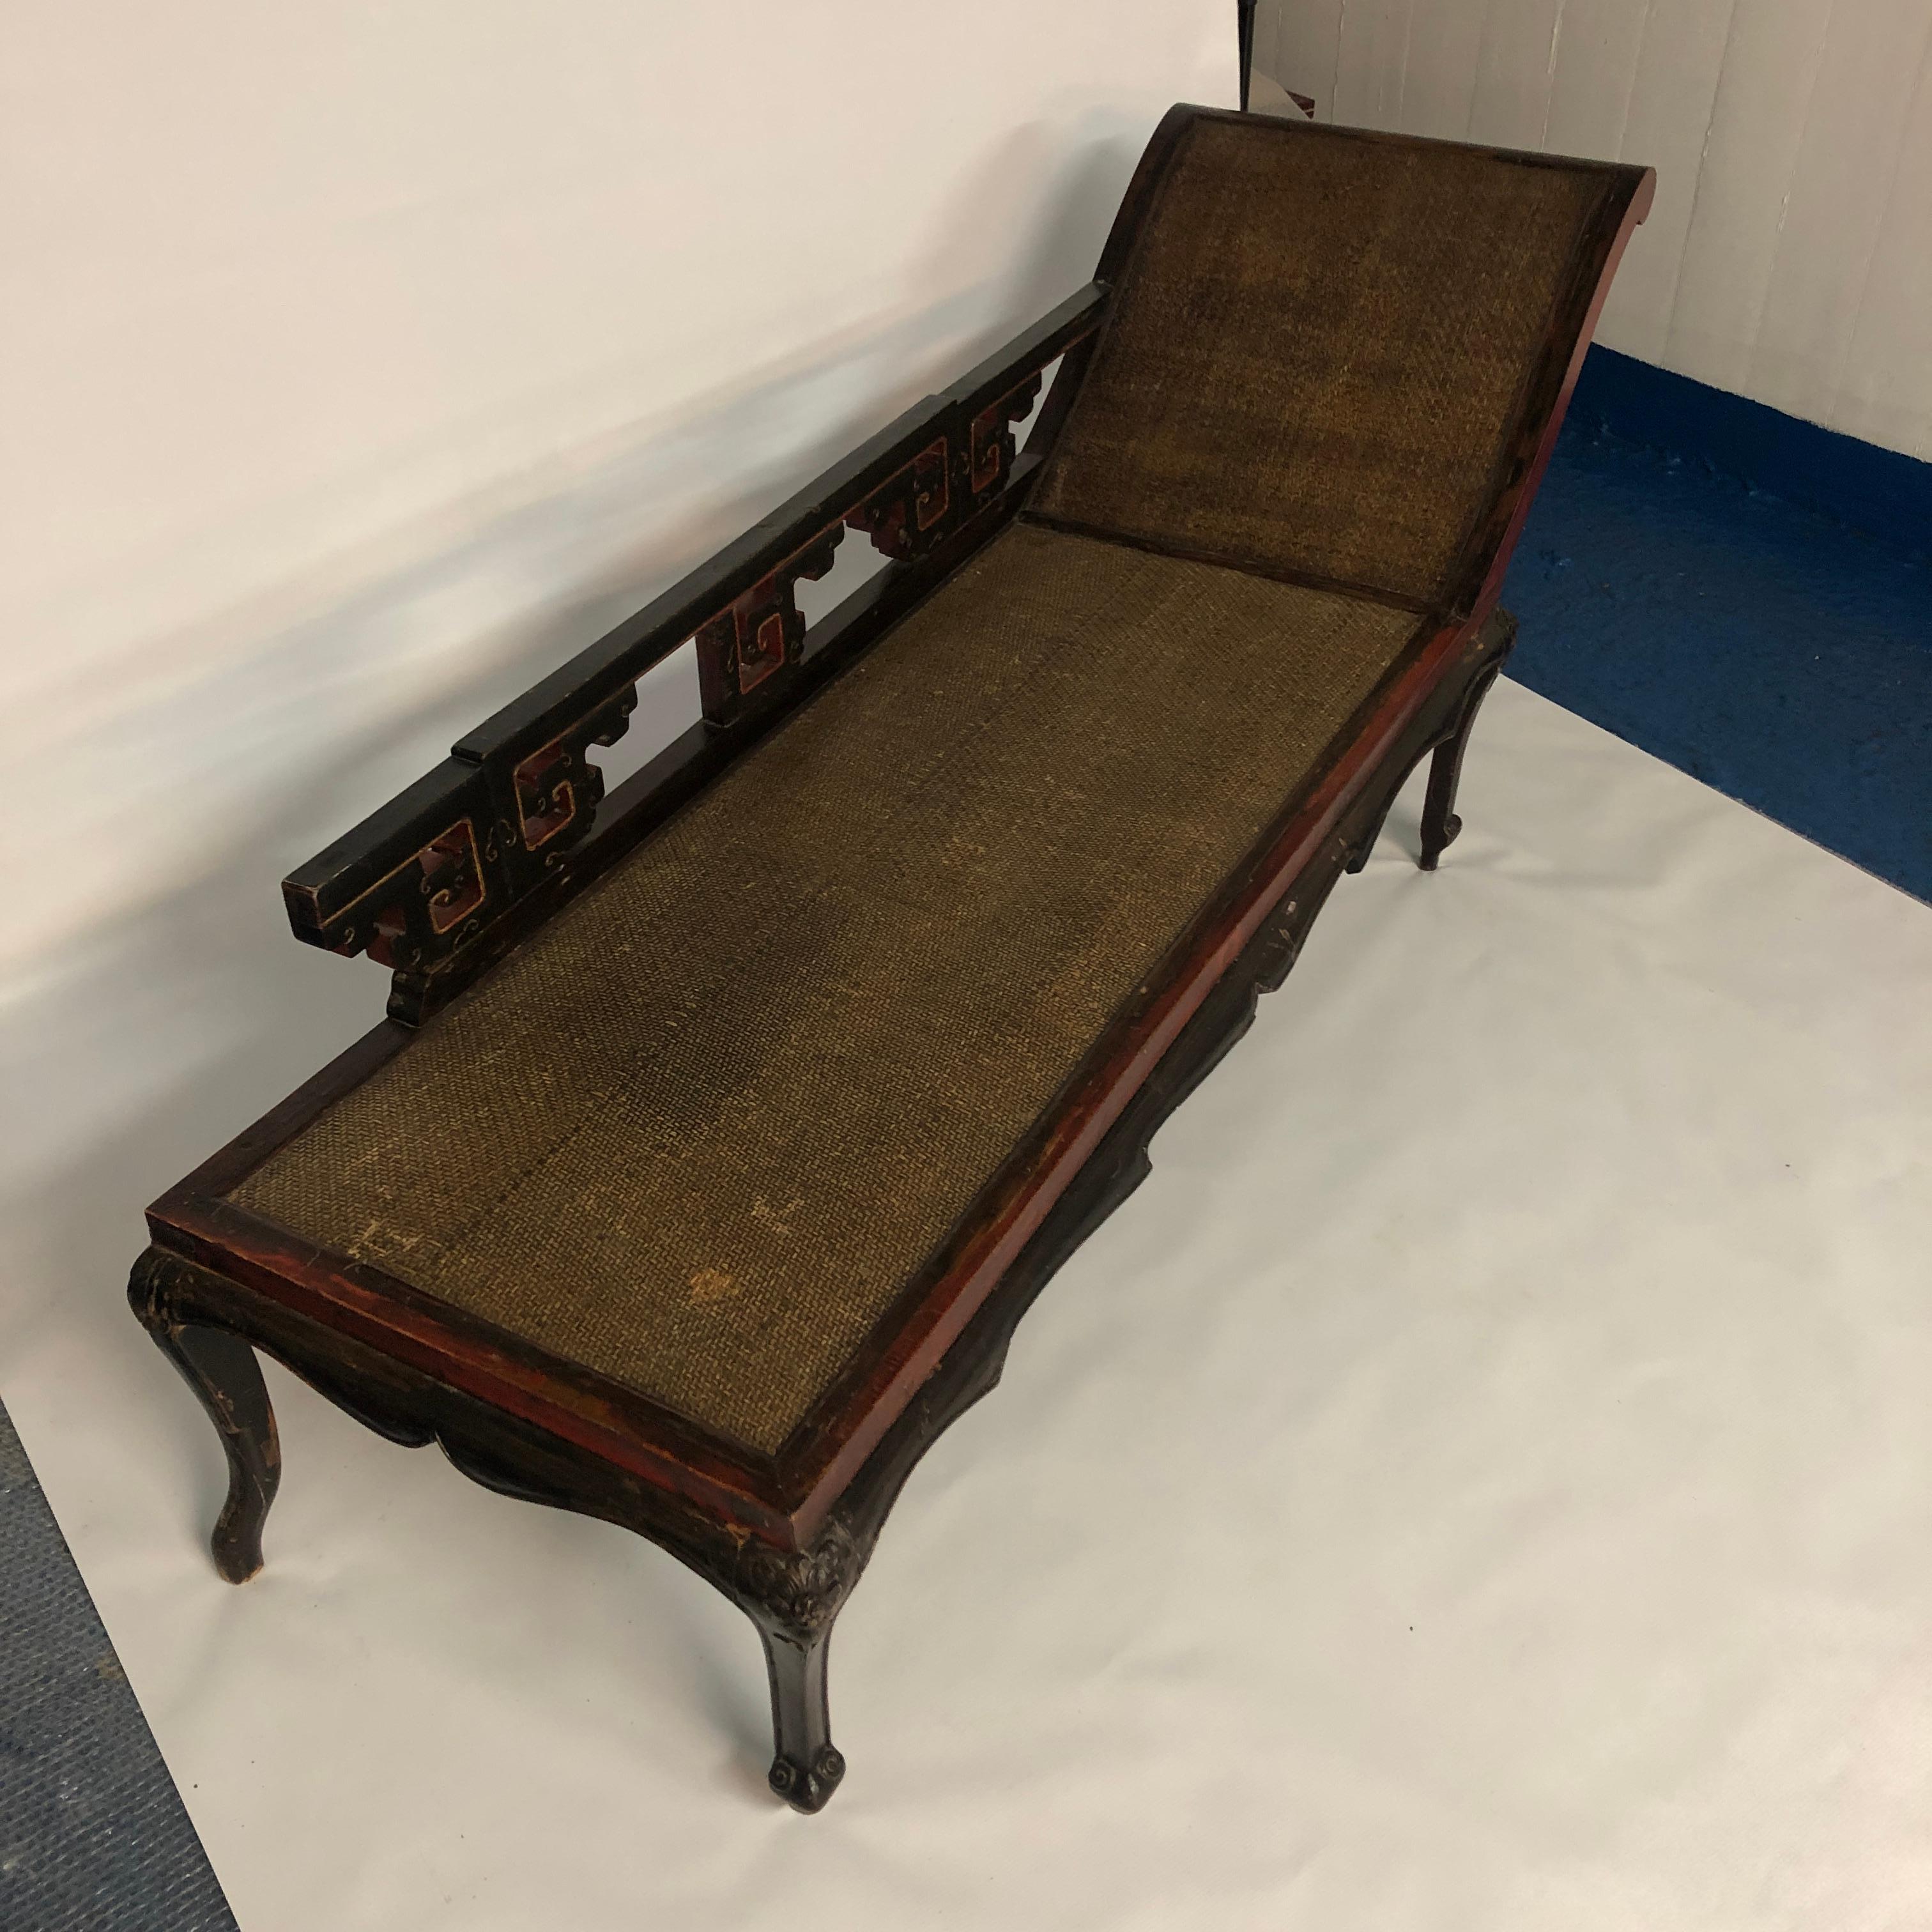 Late 19th Century Chinese Hardwood Rattan Daybed Antique Qing Chaise Lounge Victorian Regency 1890 For Sale